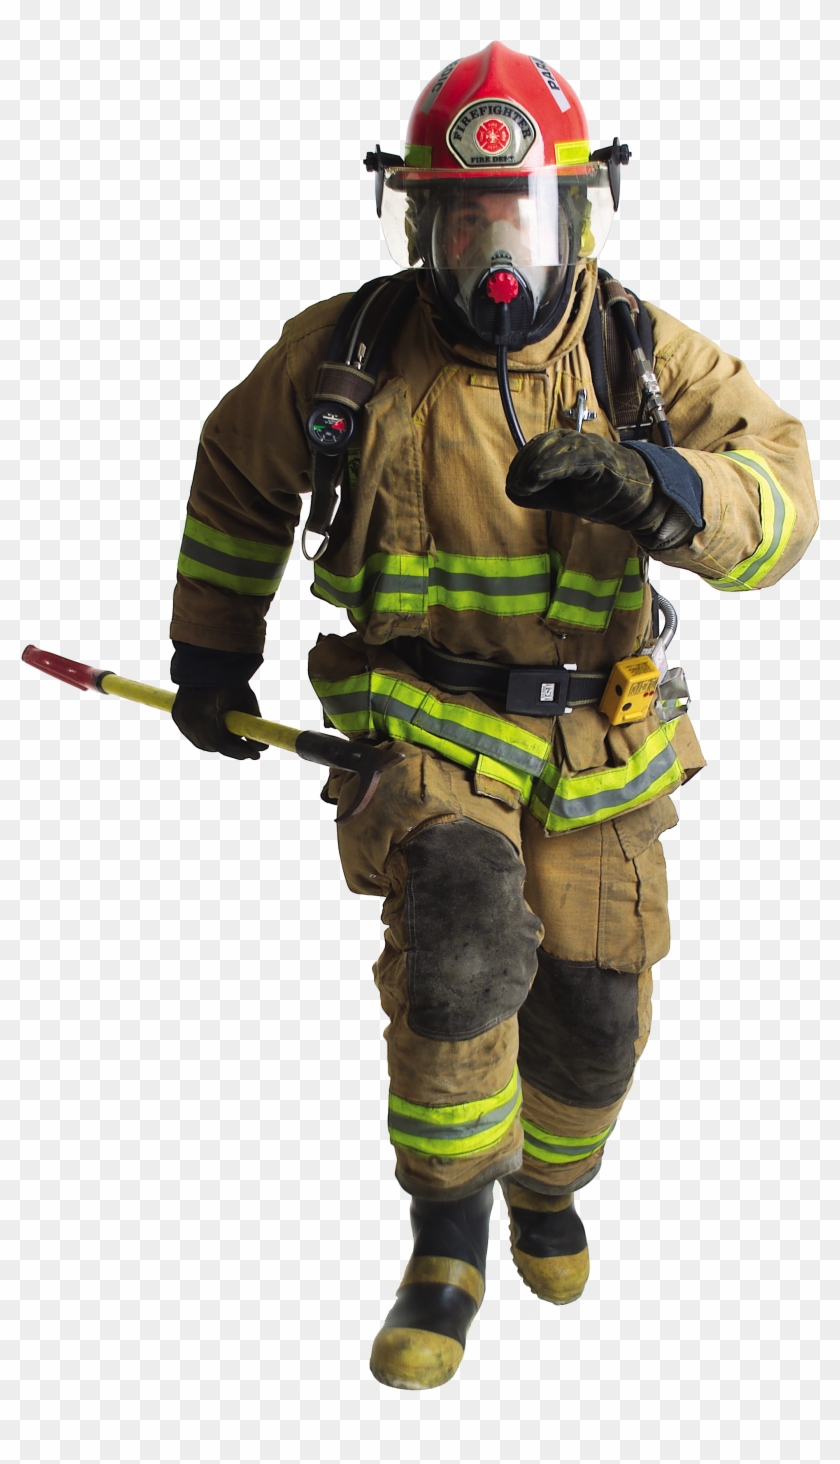 Firefighter Png - Fire Fighter In Uniform #396277